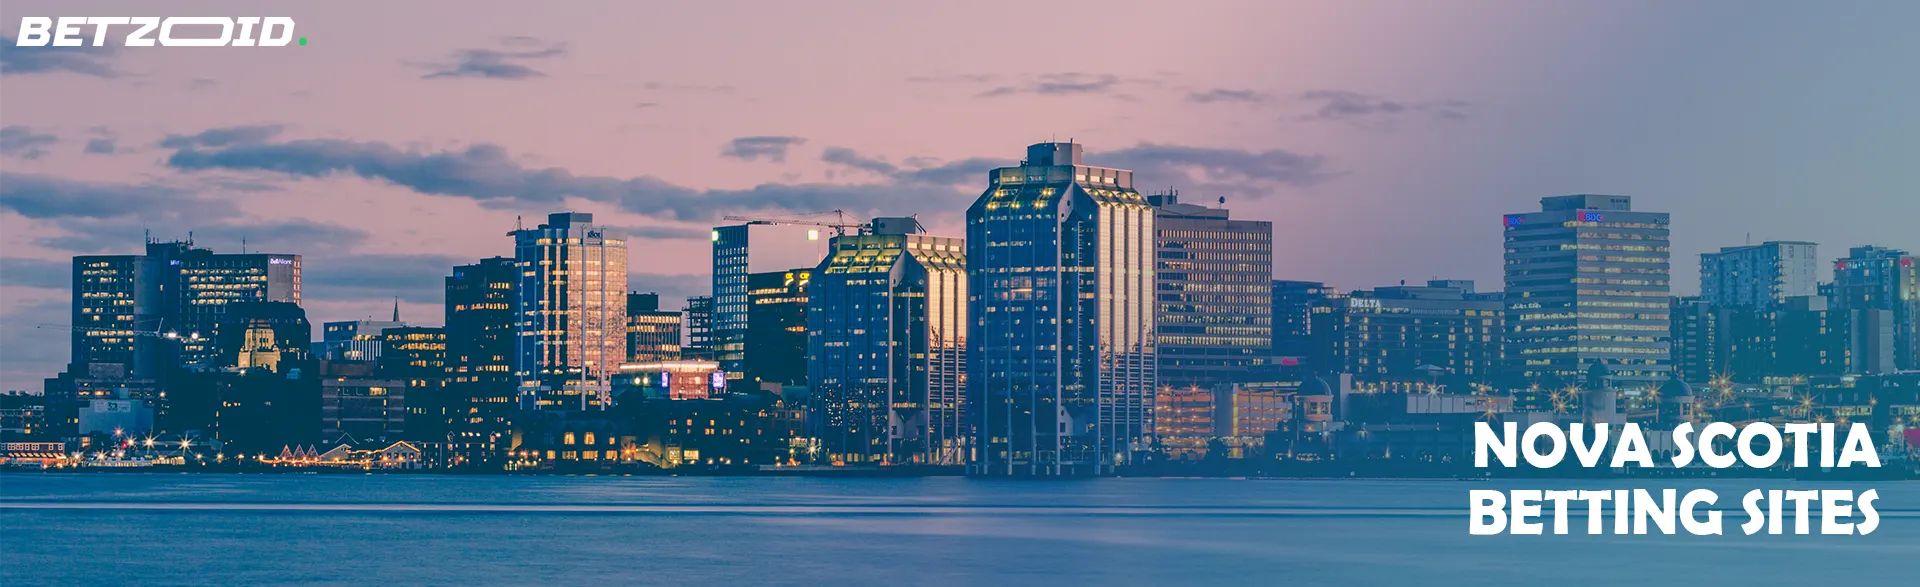  A skyline view of a city by the water at dusk, representing Nova Scotia betting sites.